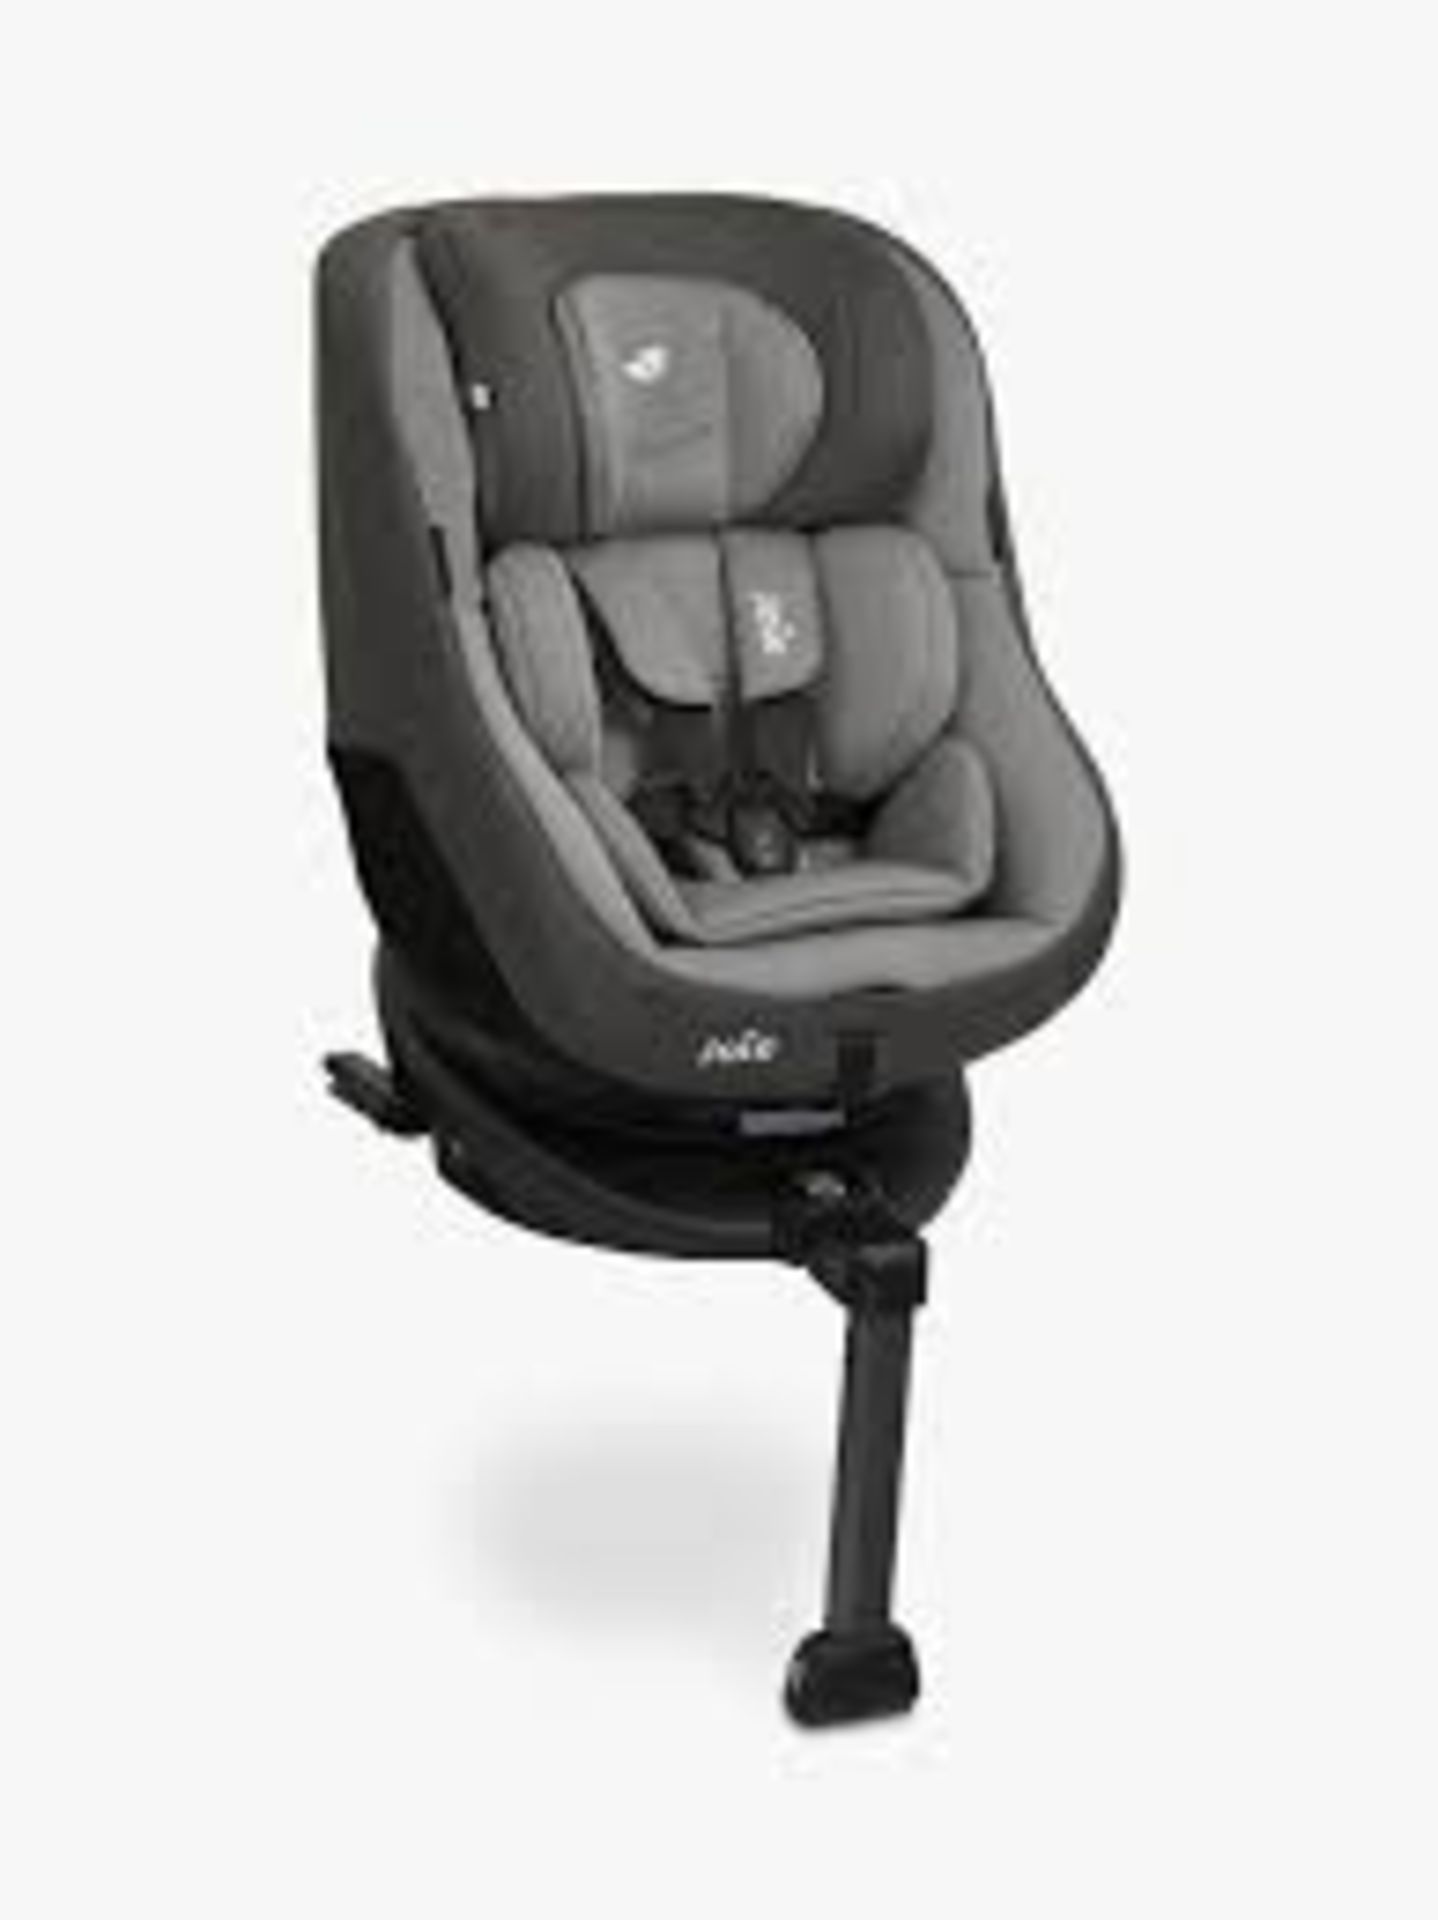 Boxed Joie Meet Spin 360 In Car Kids Safety Base RRP £300 (3757665) (Public Viewing and Appraisals